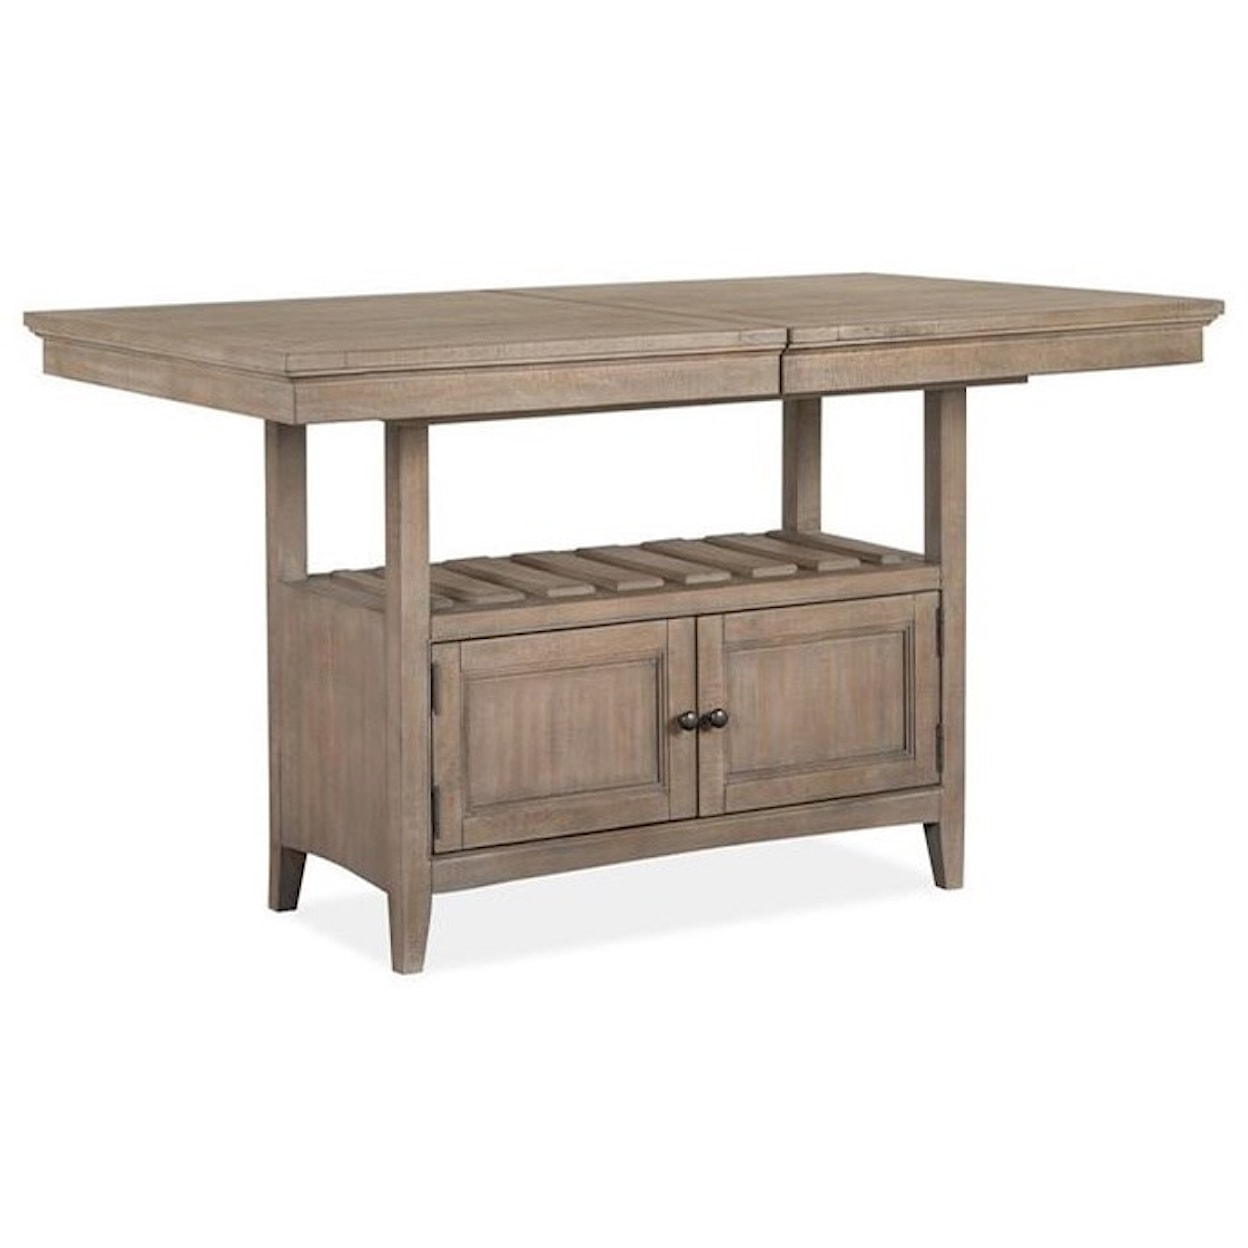 Magnussen Home Paxton Place Dining Counter Table